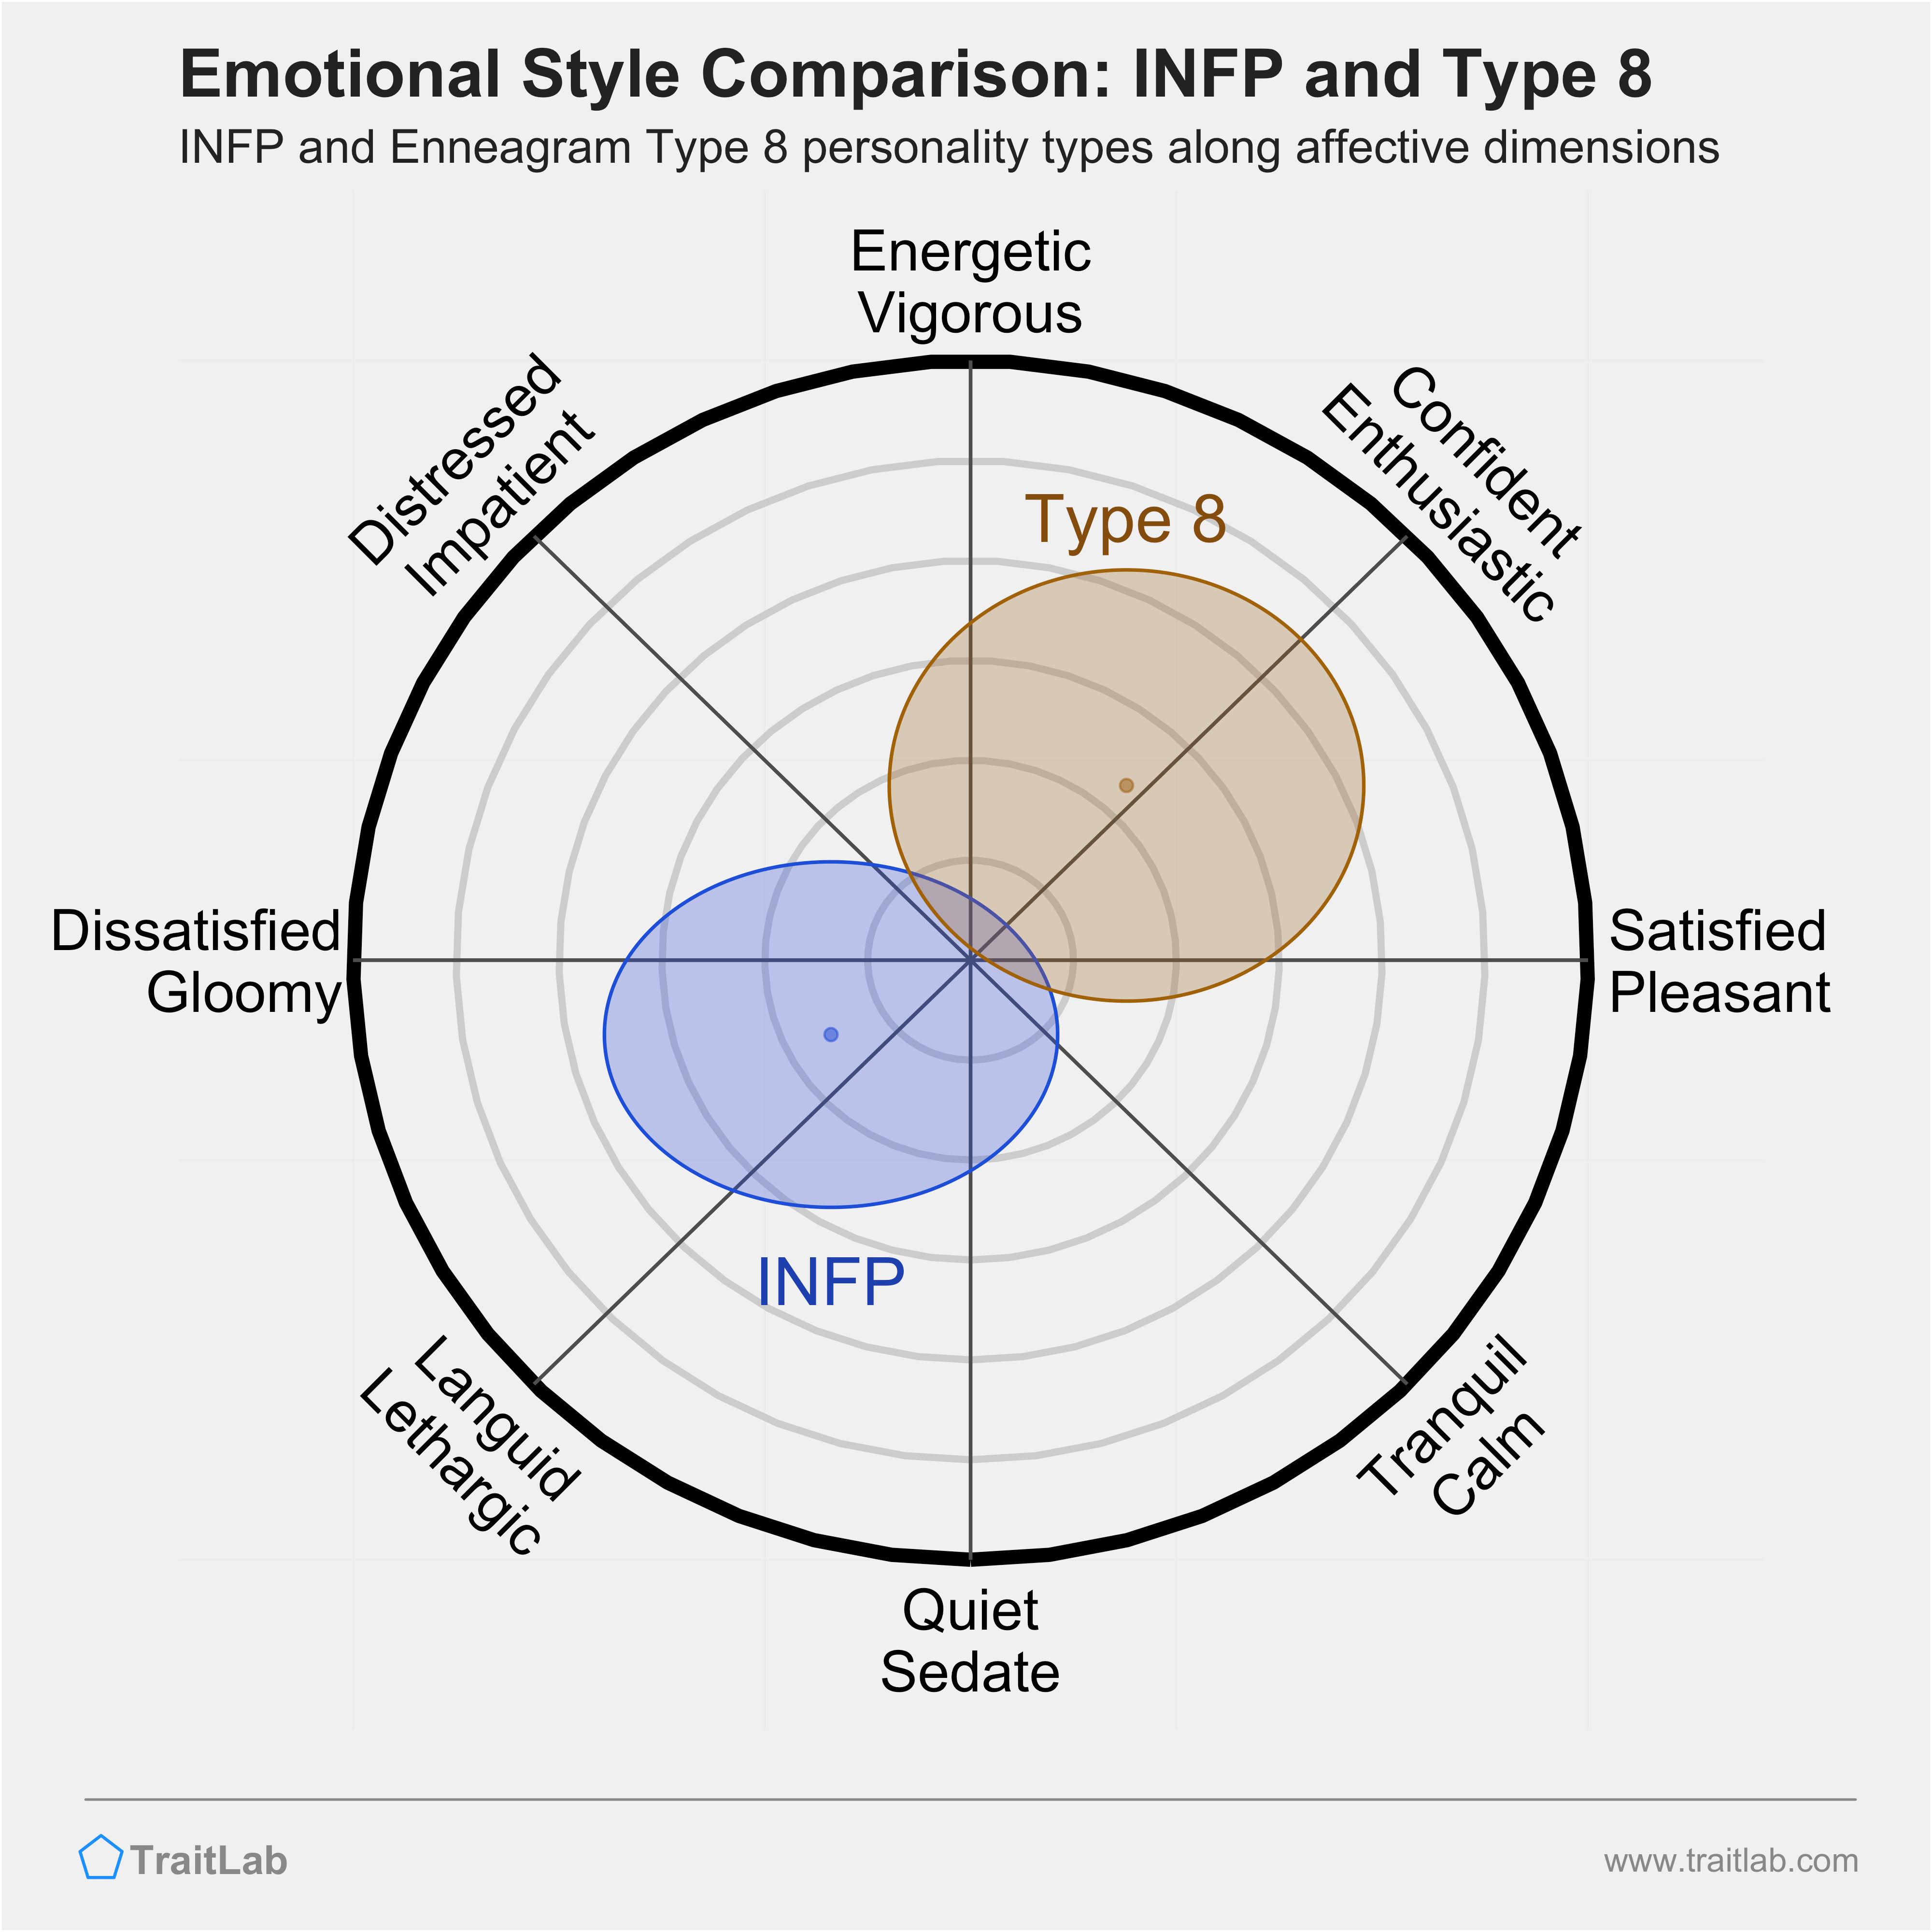 INFP and Type 8 comparison across emotional (affective) dimensions